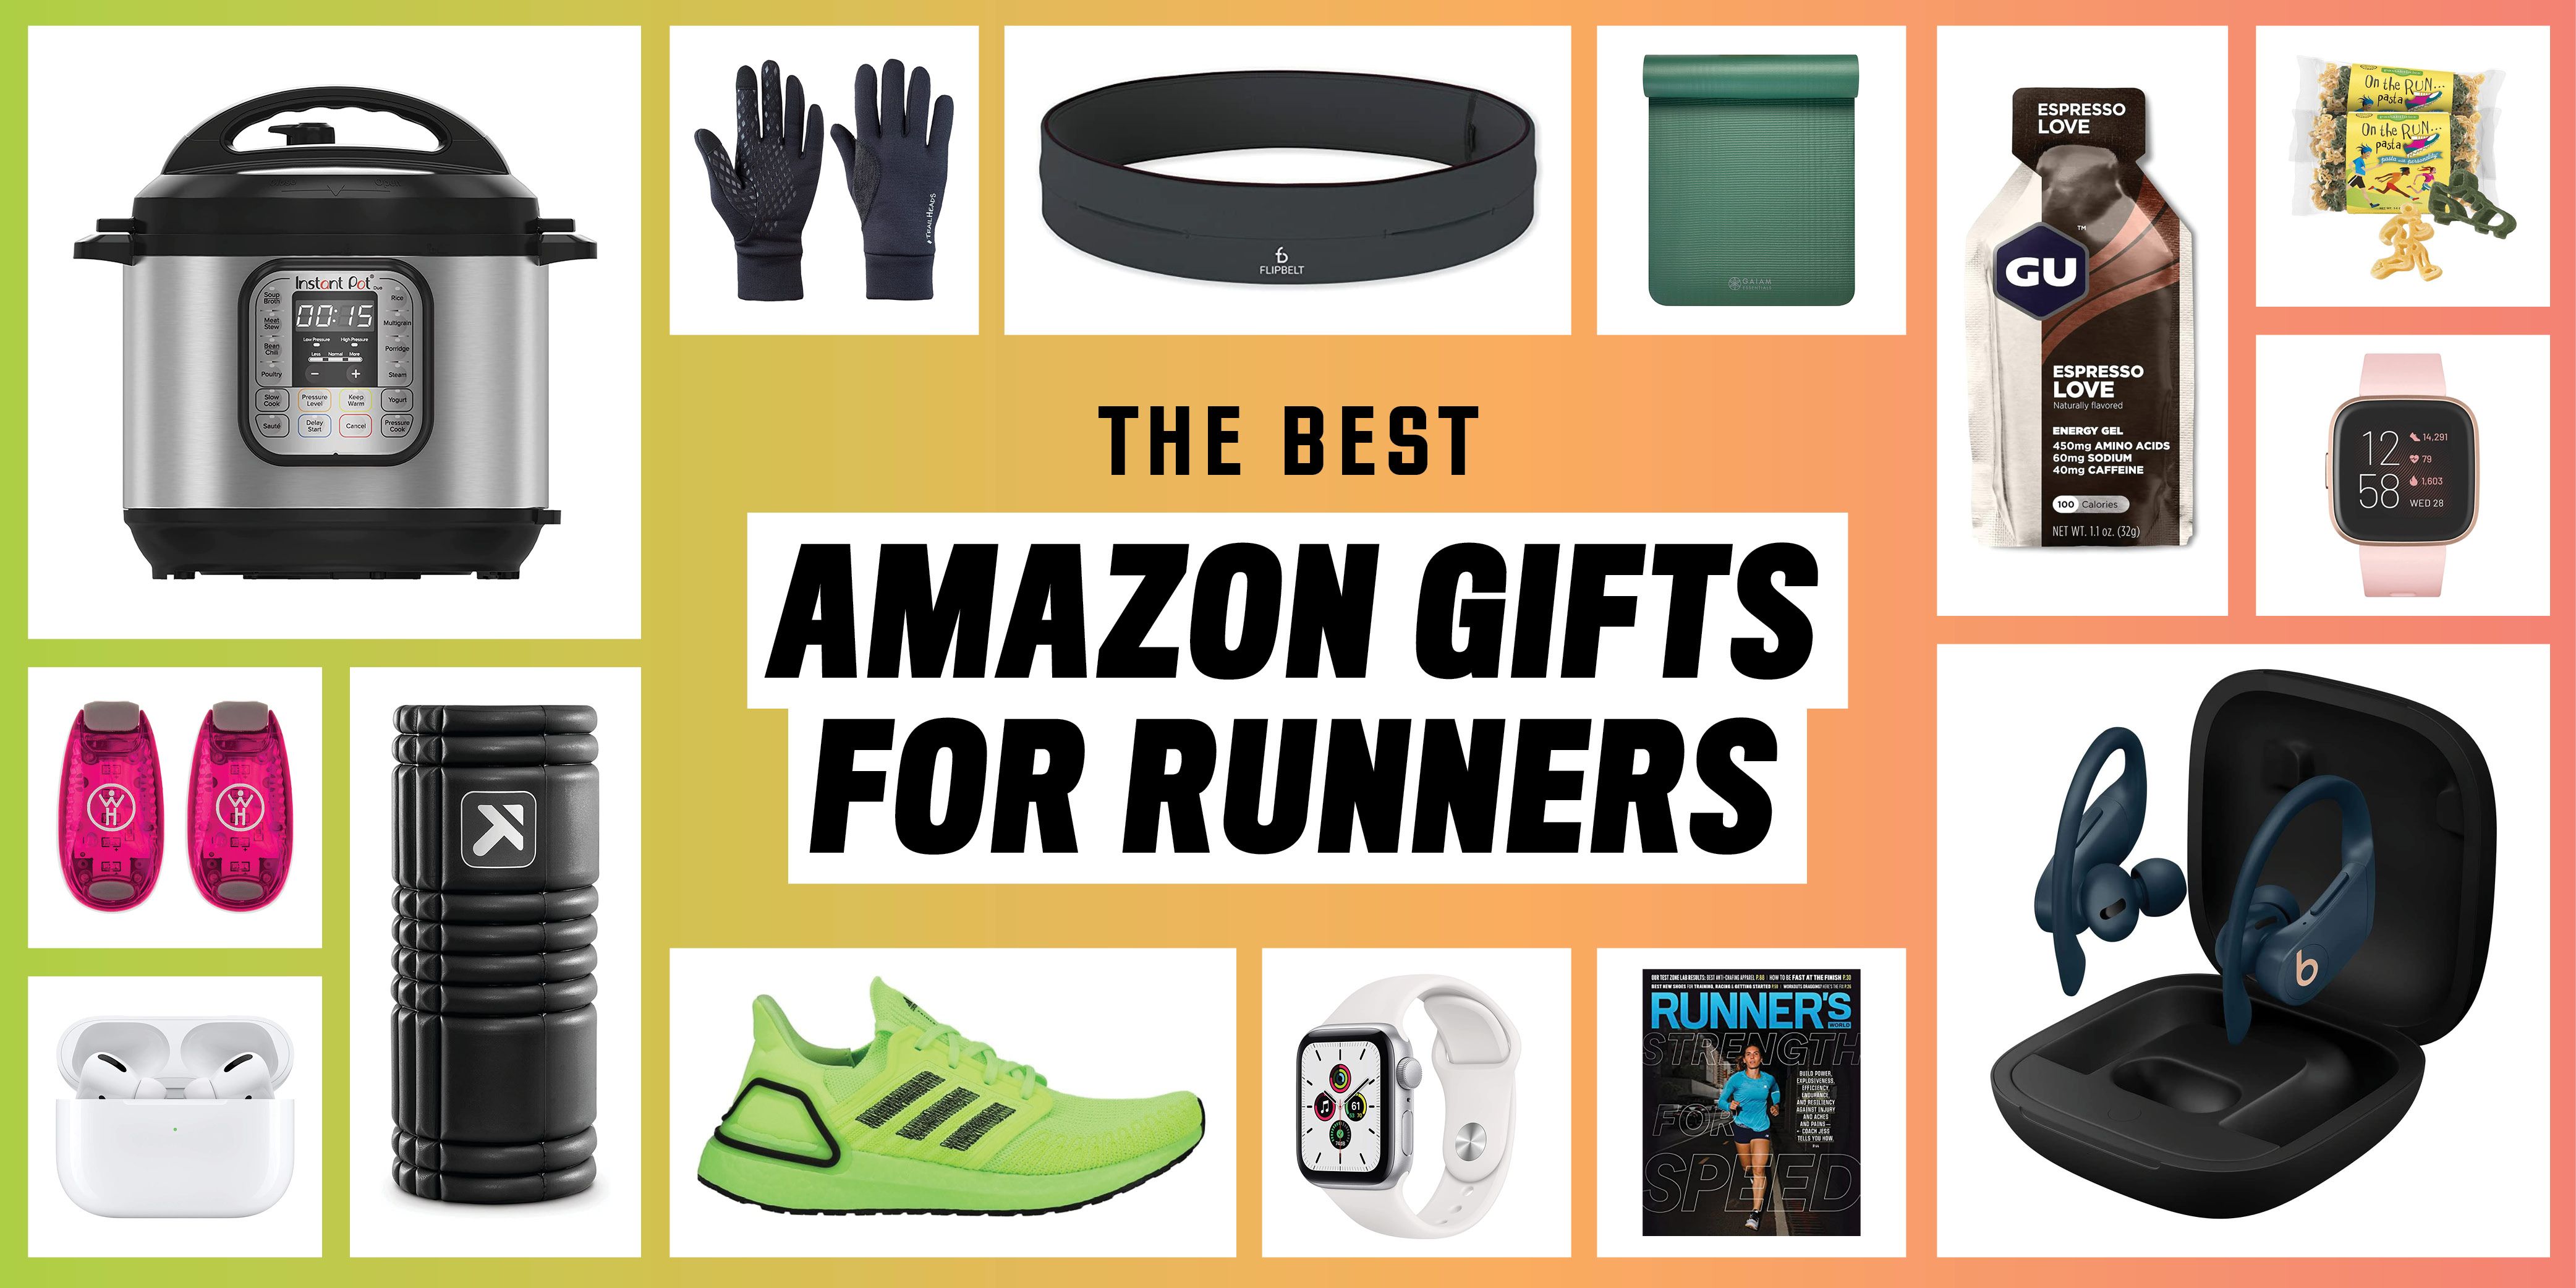 10 MUST-HAVE GIFTS FOR RUNNERS | Run4Adventure - YouTube